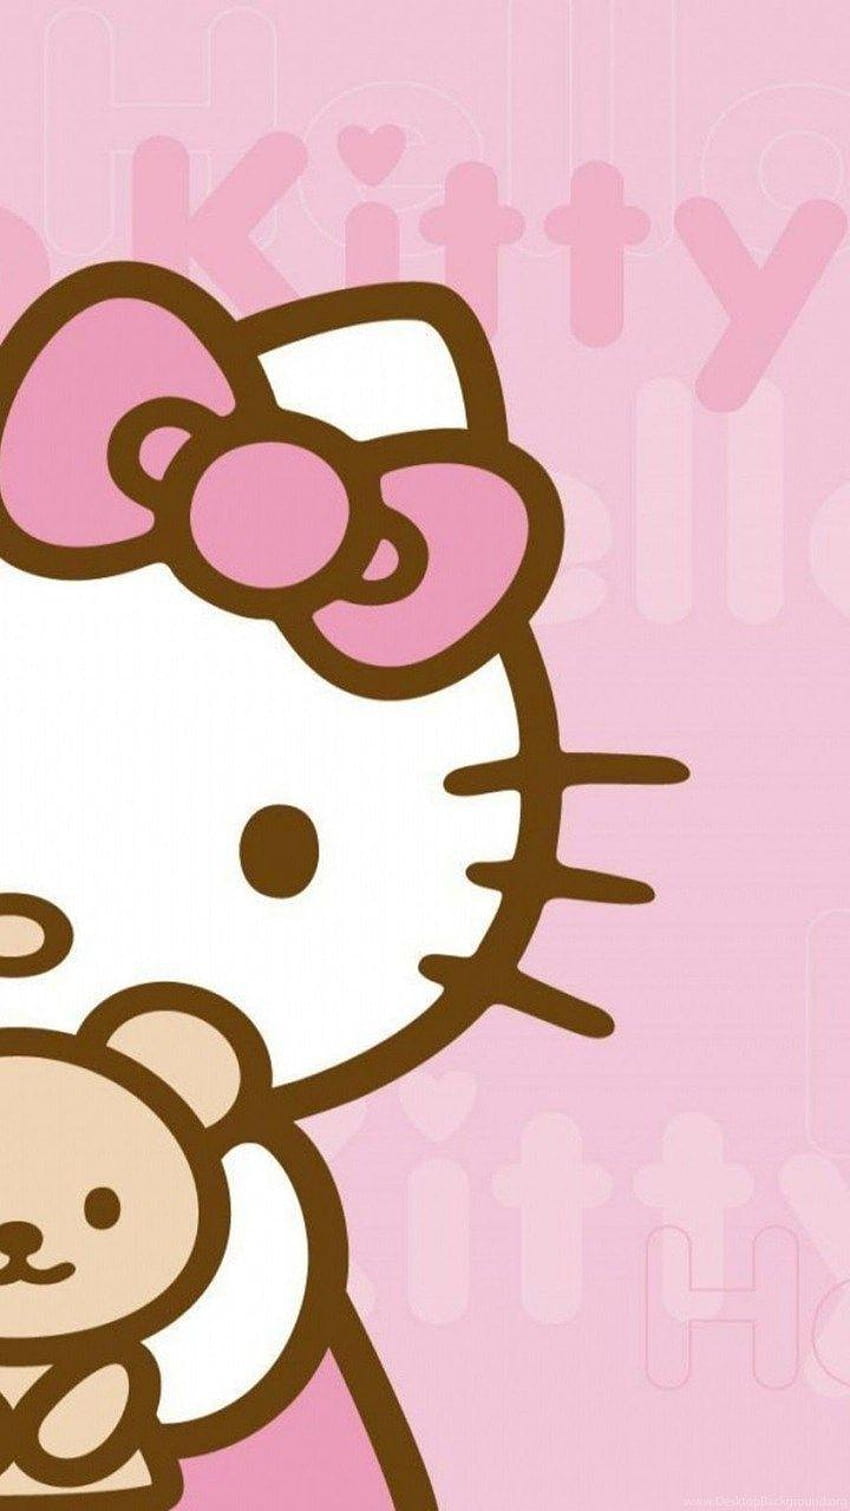 Hello Kitty For Android Tablet Backgrounds, hello kitty android HD phone wallpaper